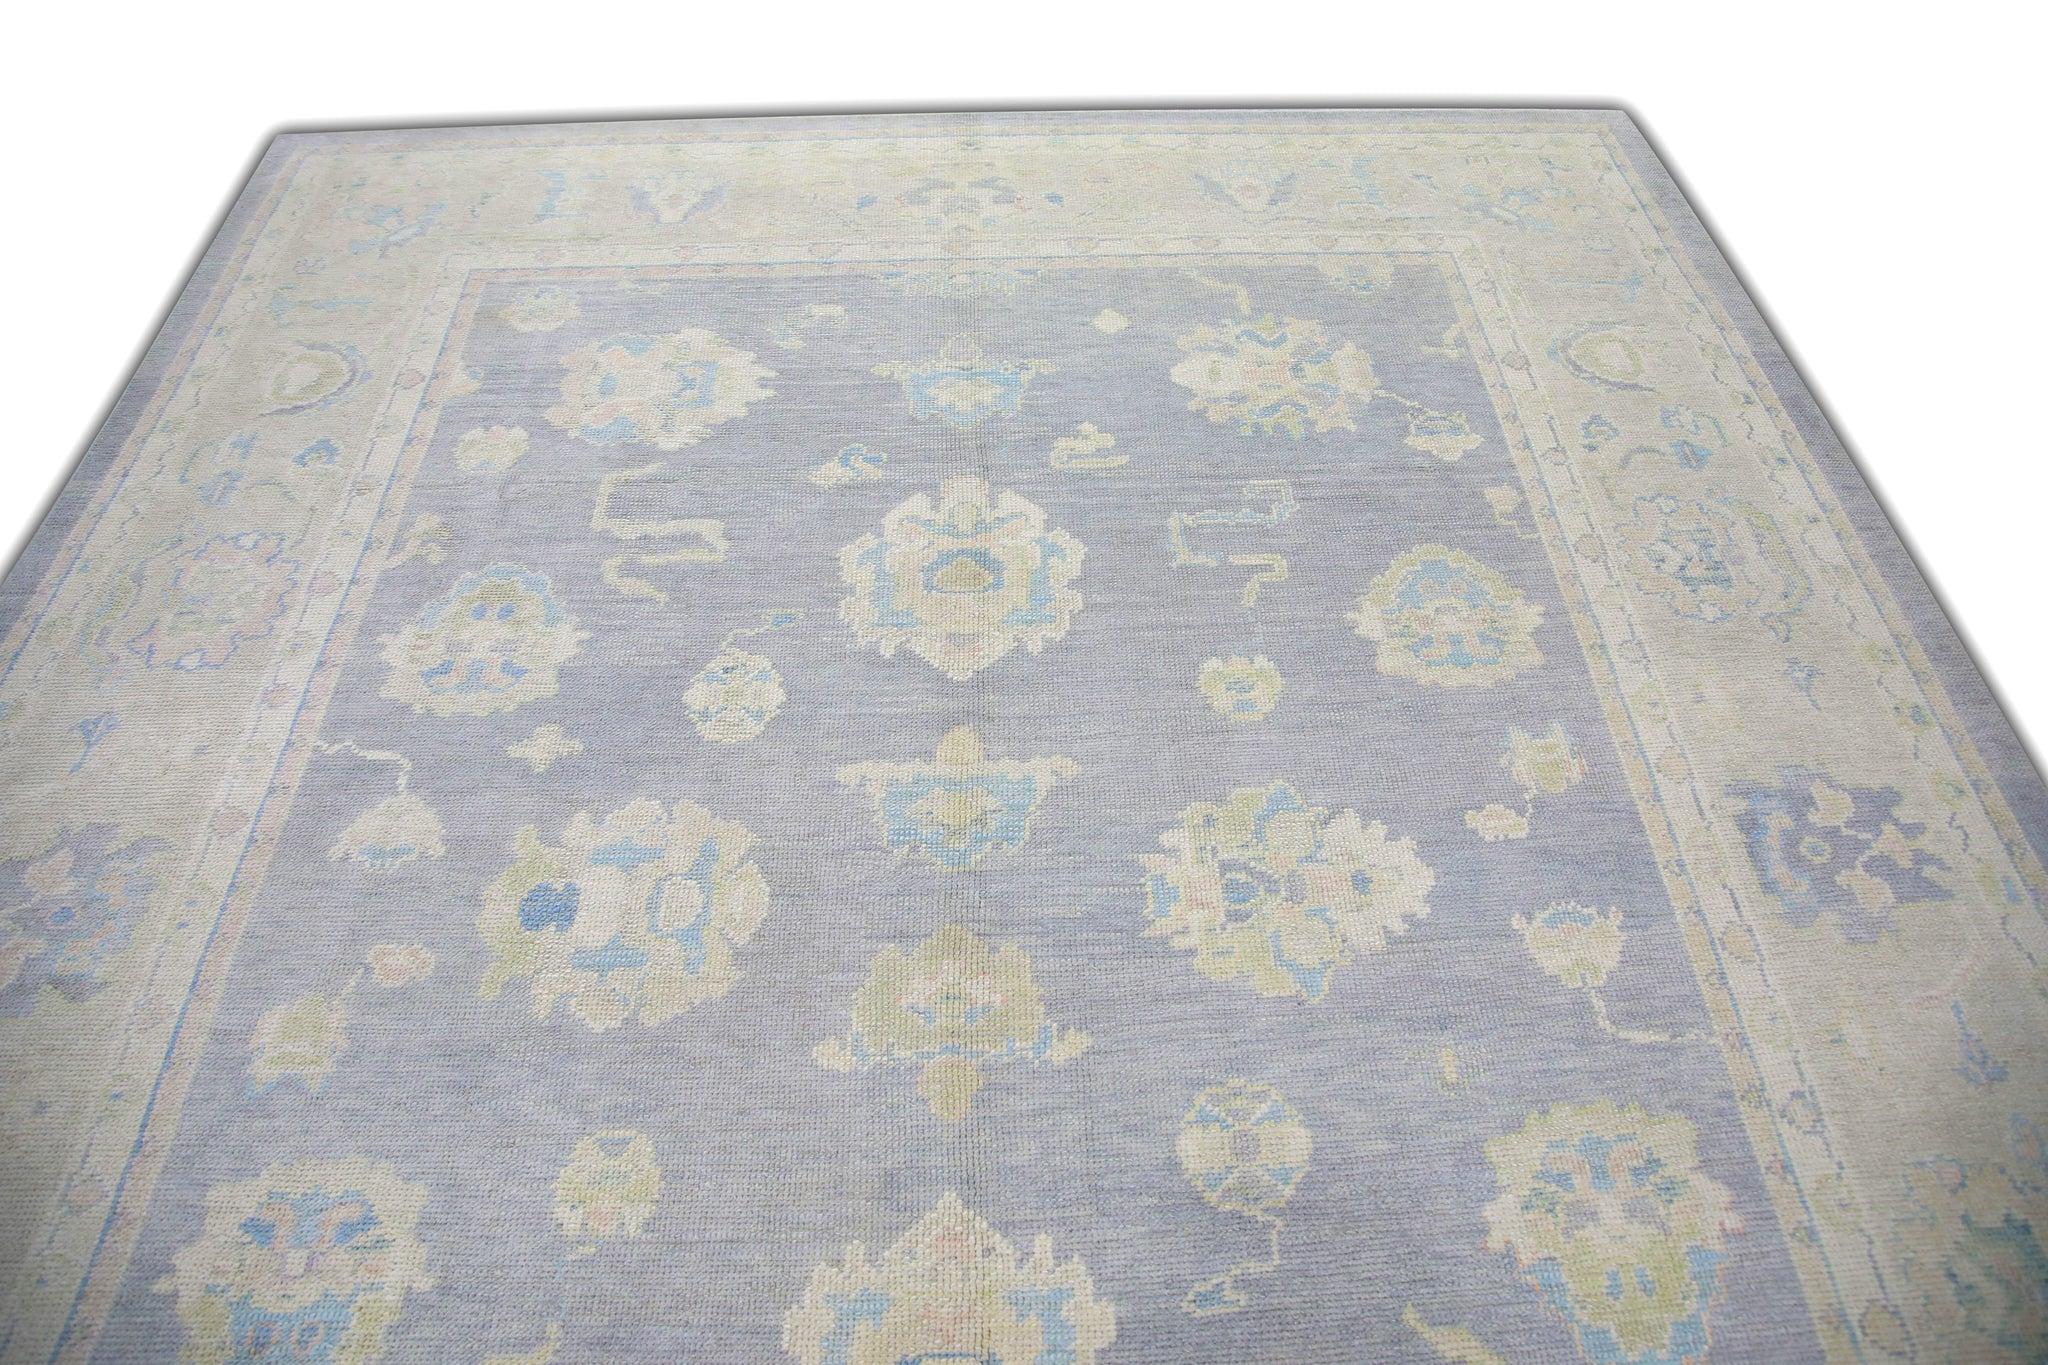 Blue and Cream Floral Handwoven Wool Turkish Oushak Rug 8' x 10'4